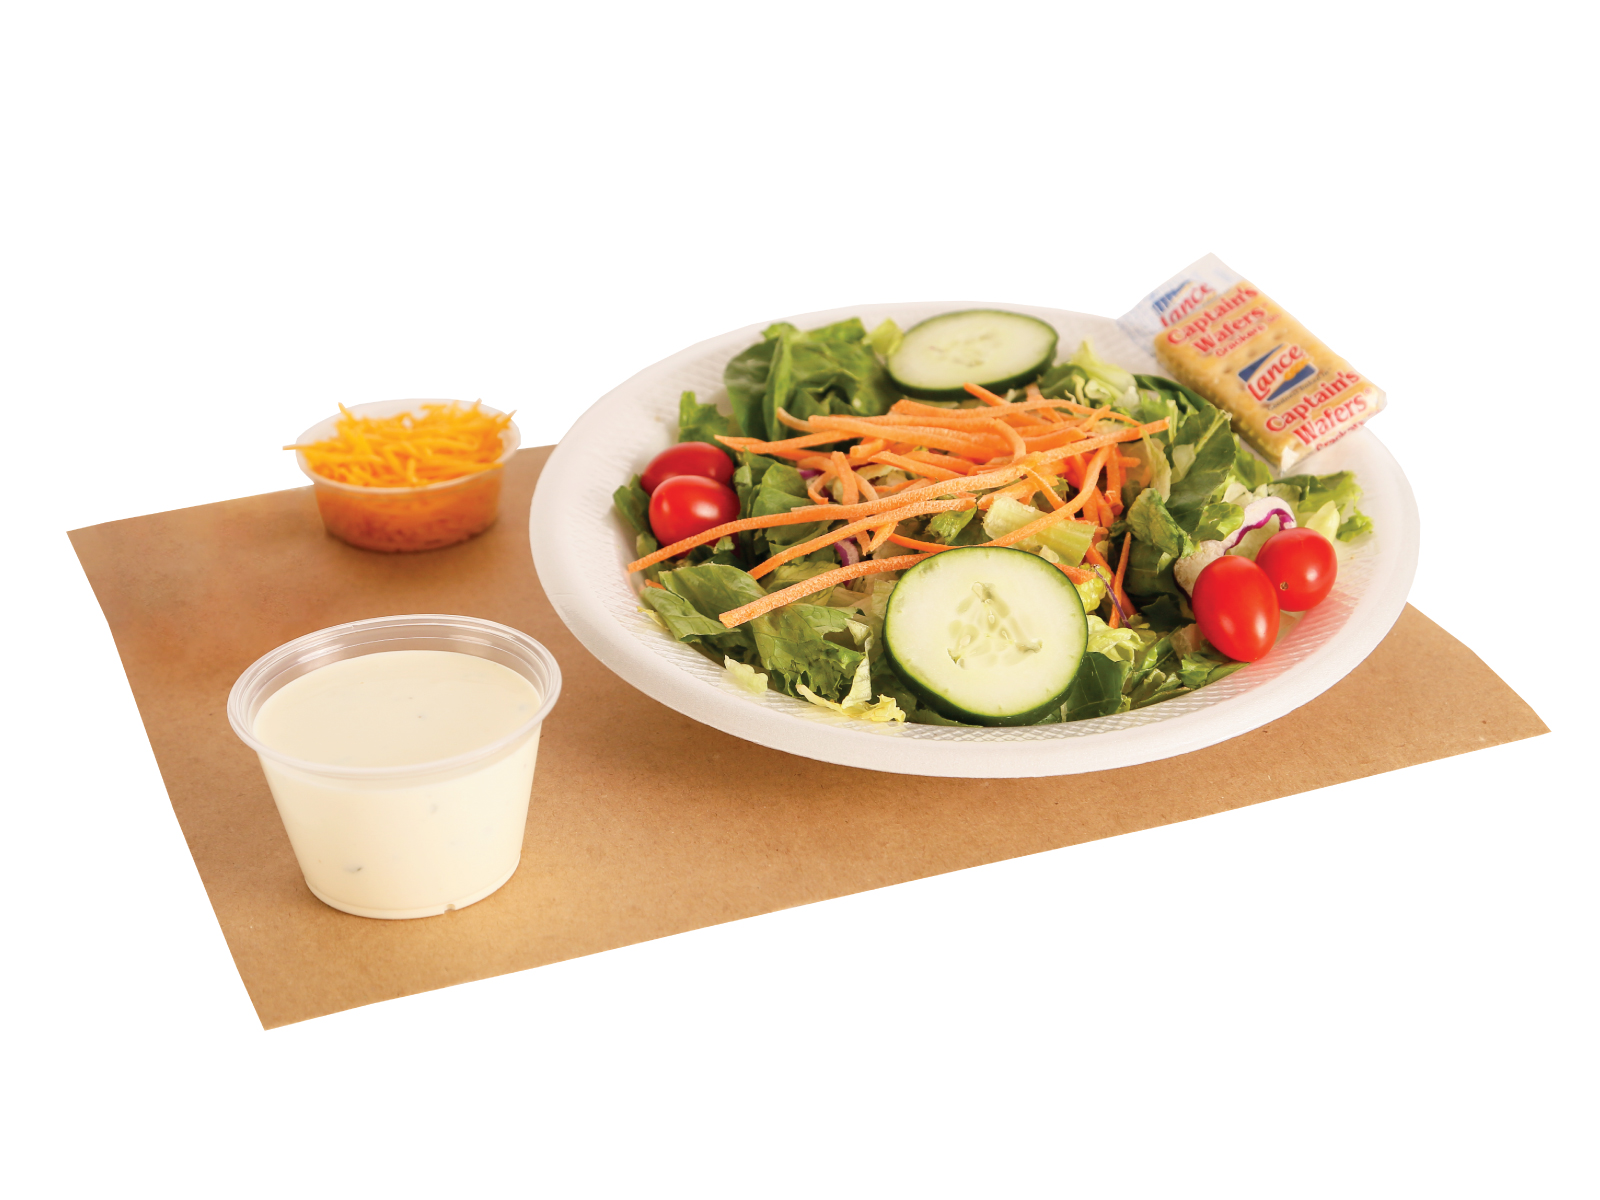 Salad Delite with turkey breast which includes, lettuce, tomatoes, crackers, cucumbers, cheese, and a ranch cup